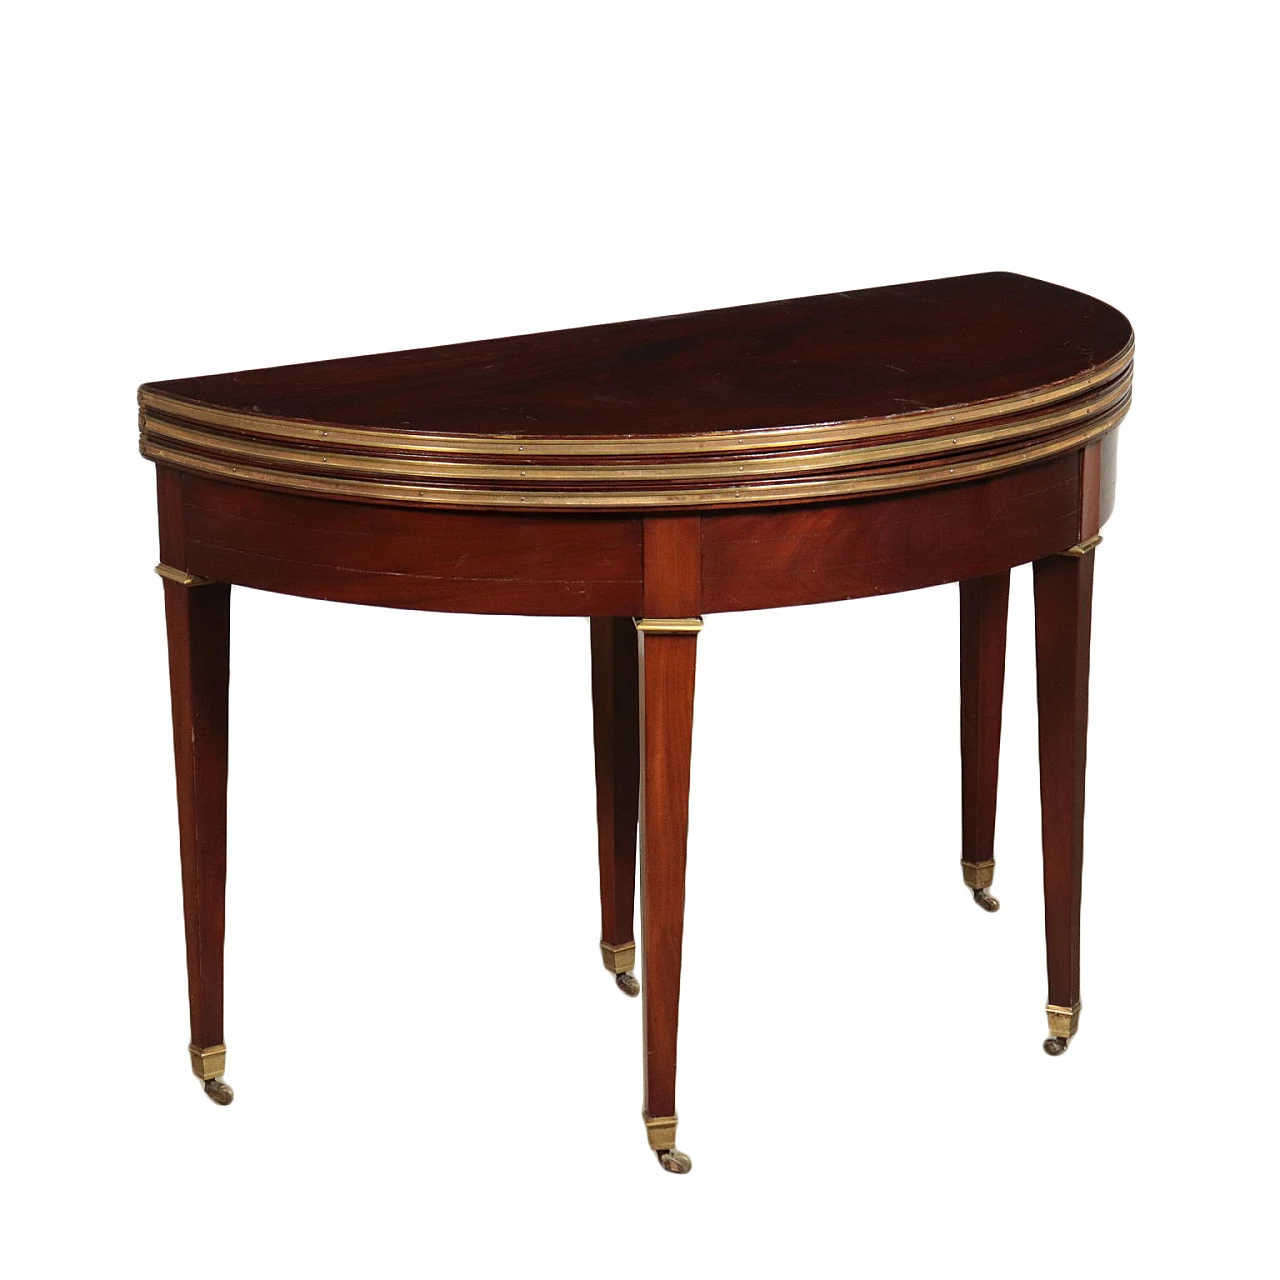 Directoire mahogany extendable table with casters, early 19th century 1